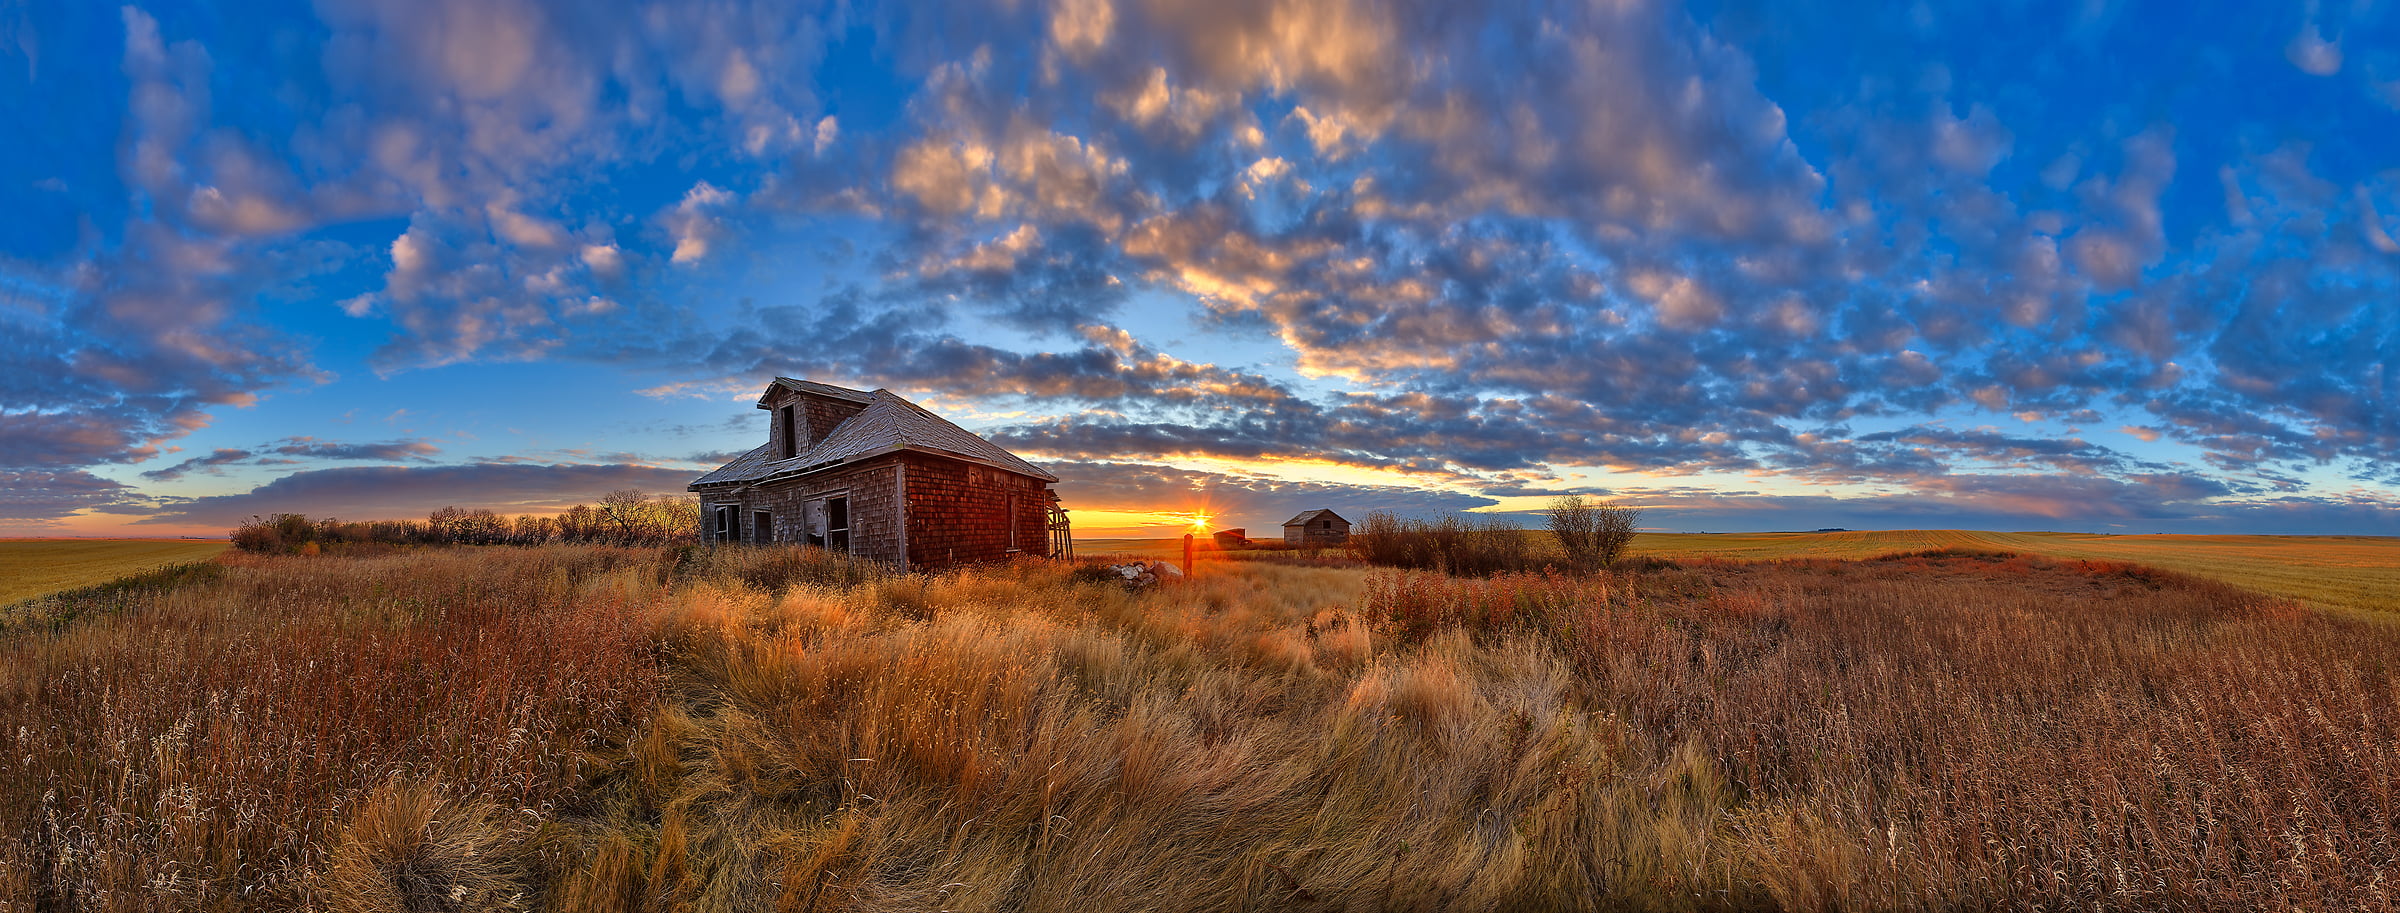 137 megapixels! A very high resolution, large-format VAST photo of farmland, grasslands, the prairie, and an old abandoned house; fine art landscape photo created at sunset by Scott Dimond on the Great Plains in Alberta, Canada